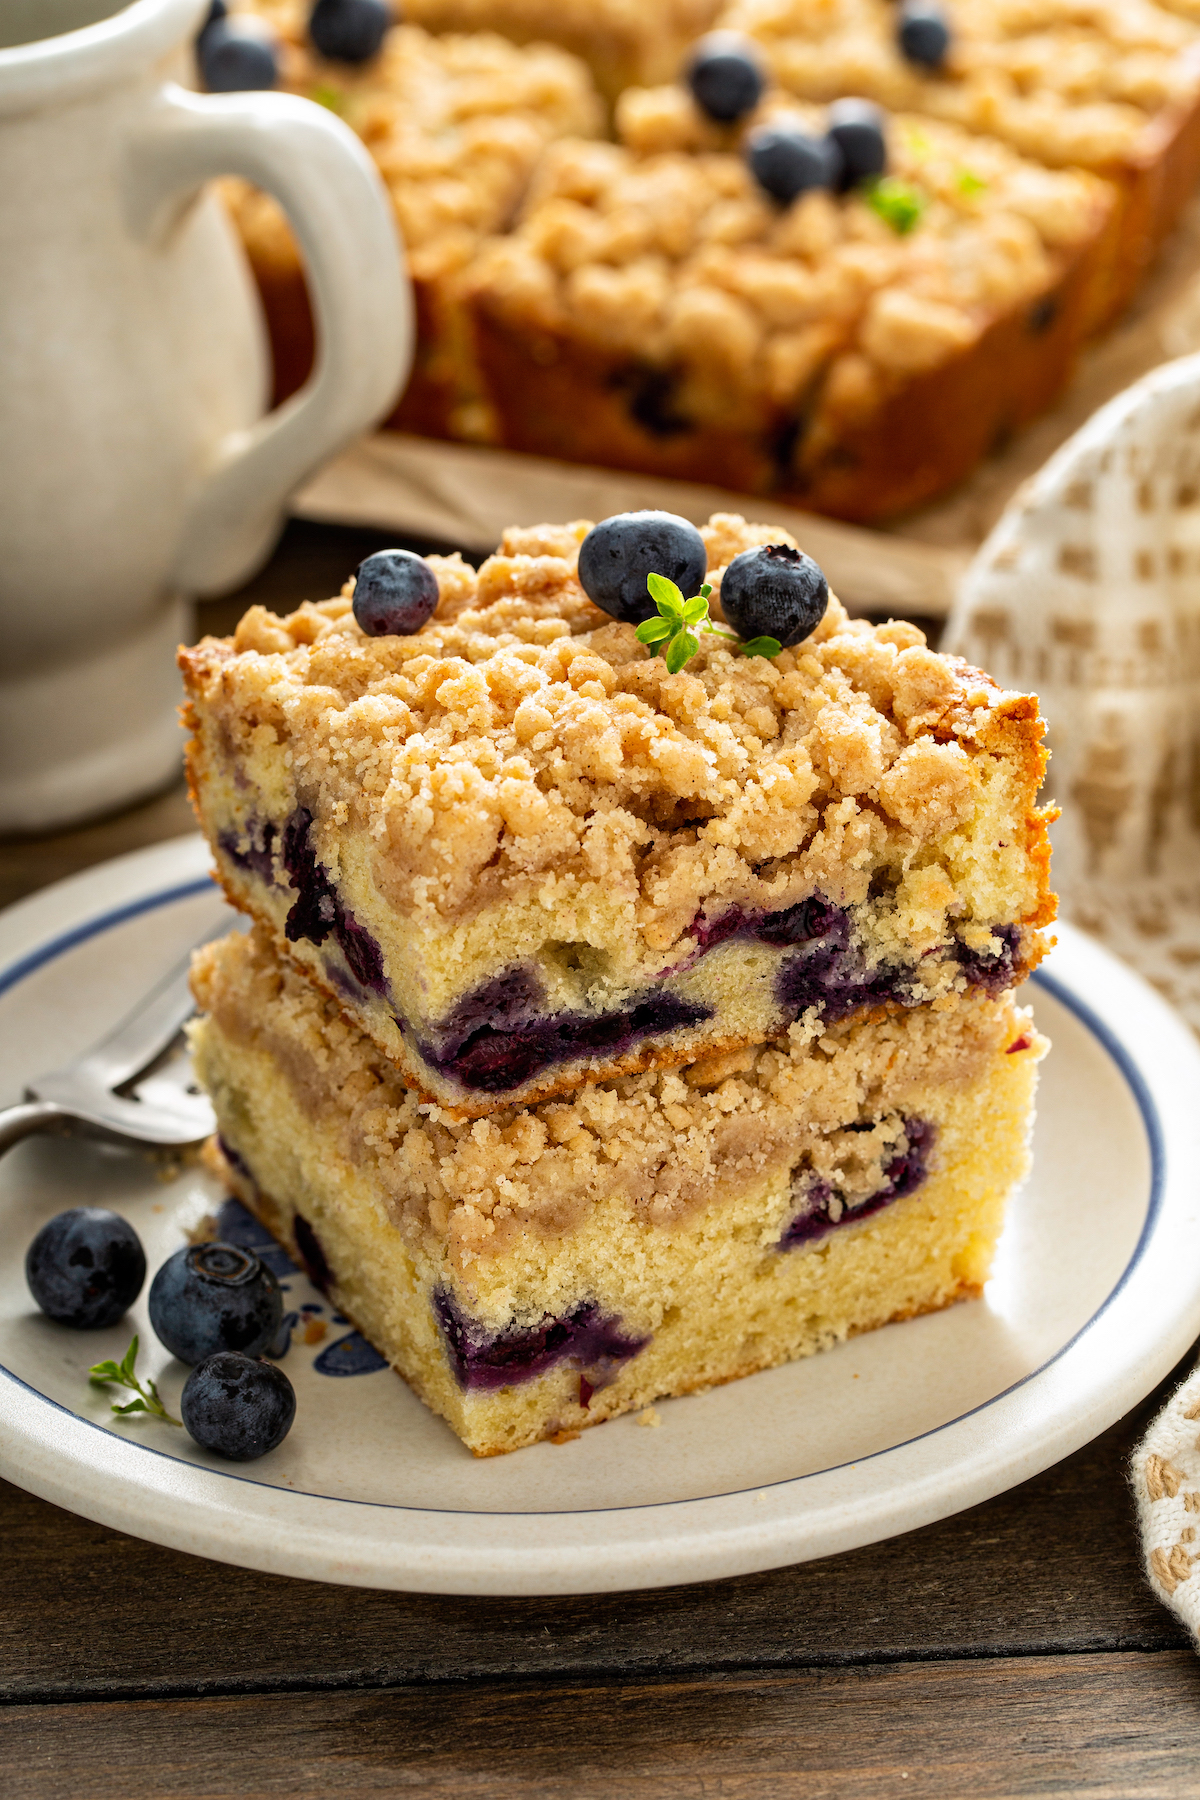 Discover more than 58 blueberry orange coffee cake - awesomeenglish.edu.vn